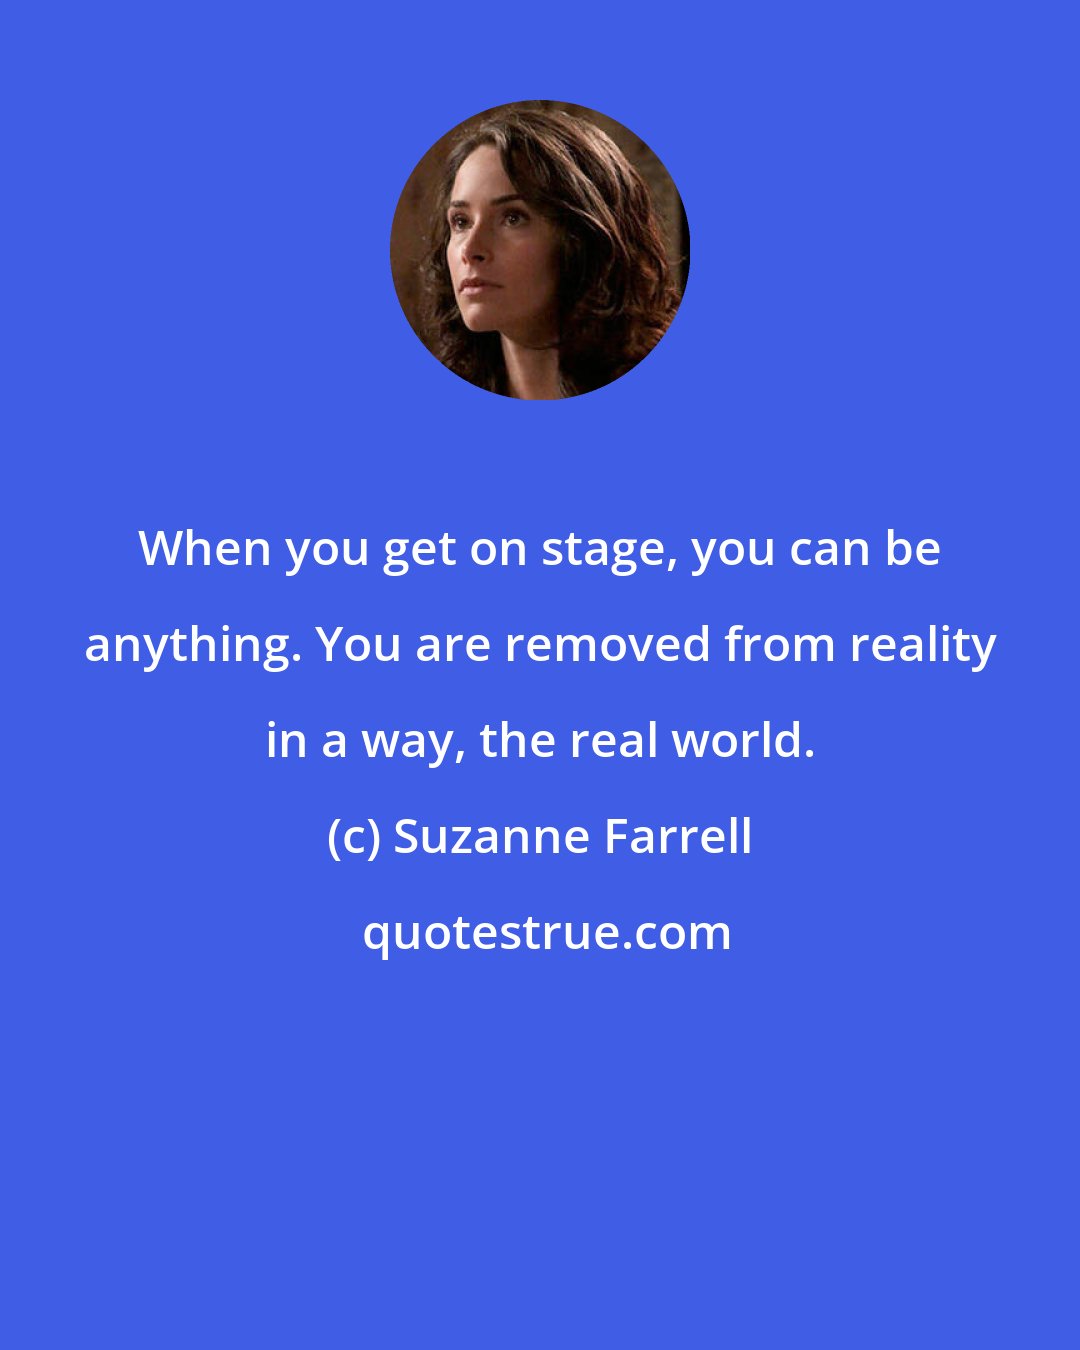 Suzanne Farrell: When you get on stage, you can be anything. You are removed from reality in a way, the real world.